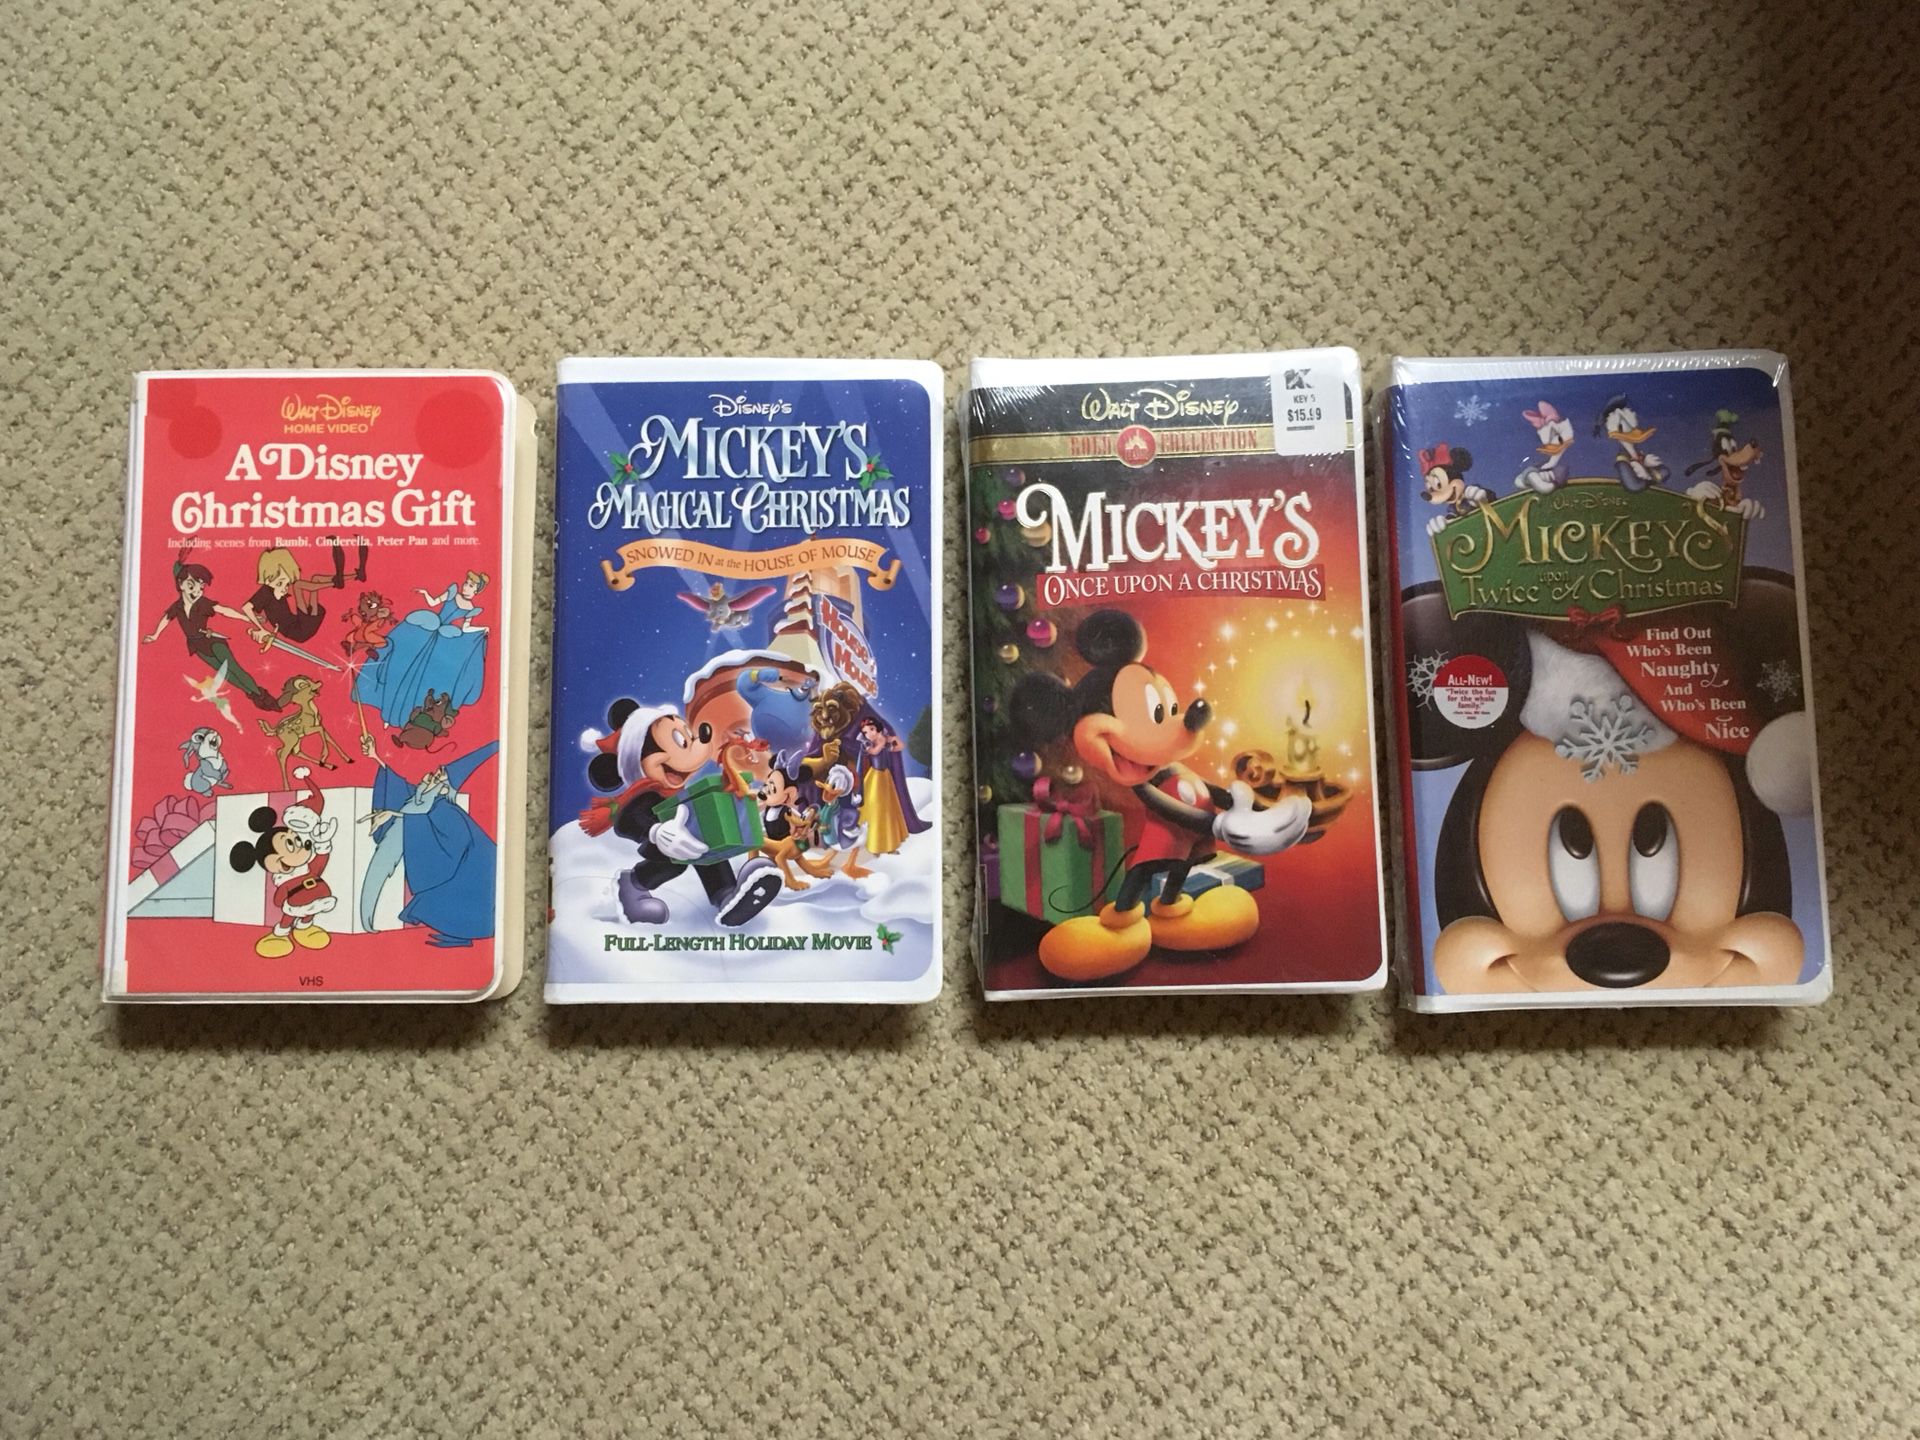 Set Of 4 Disney Videos Vhs 2 New Never Opened For Sale In Birmingham Al Offerup